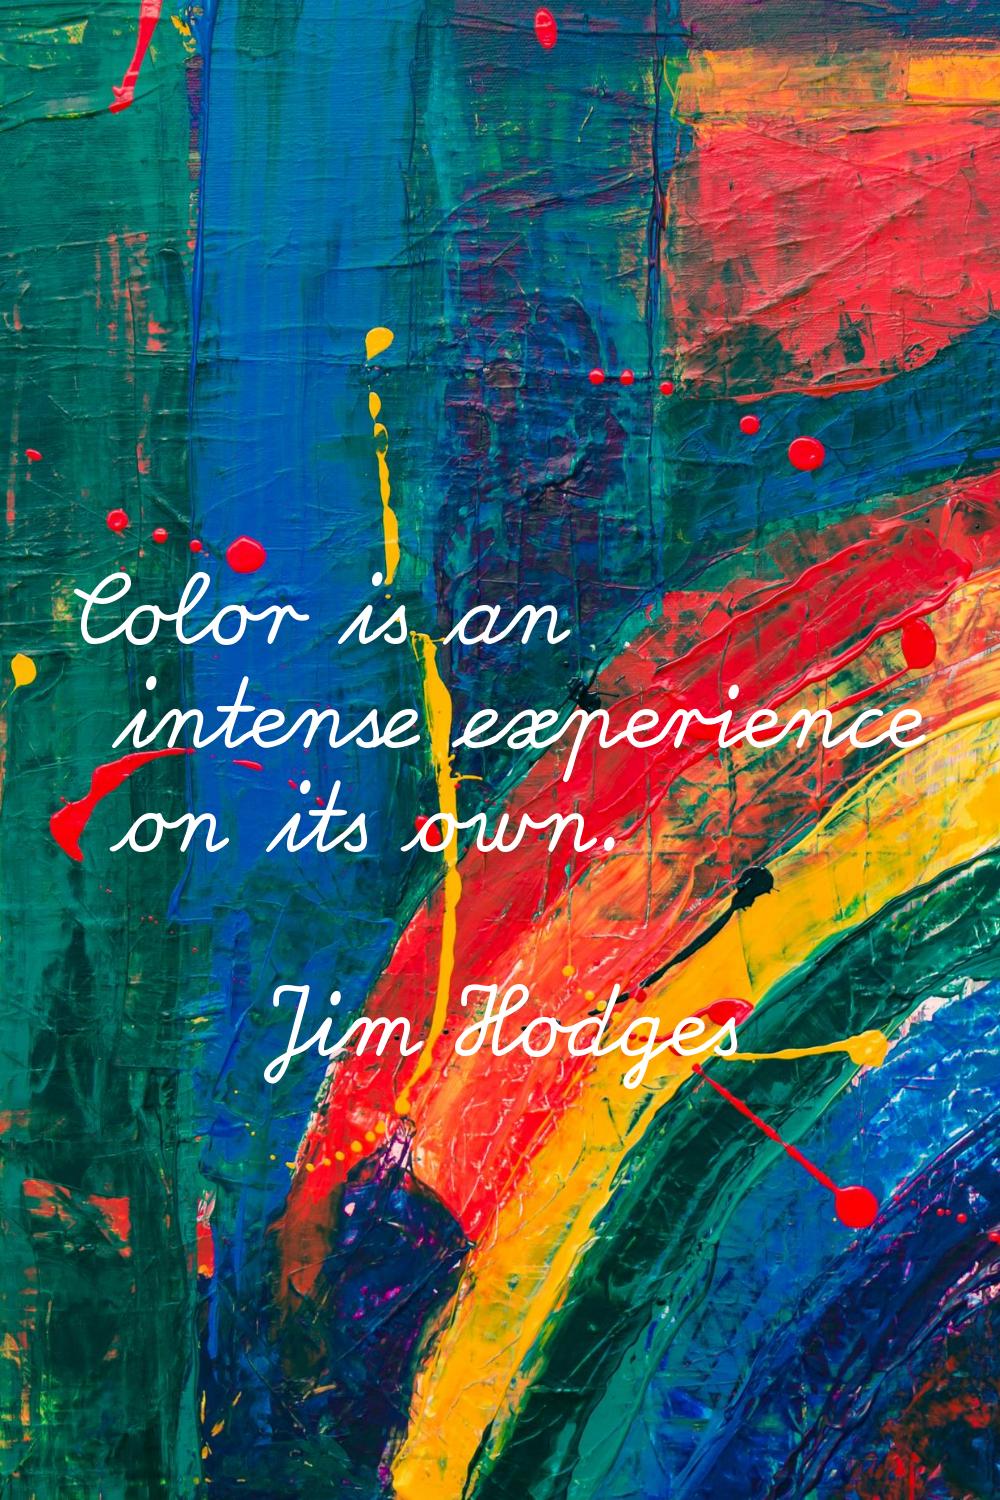 Color is an intense experience on its own.